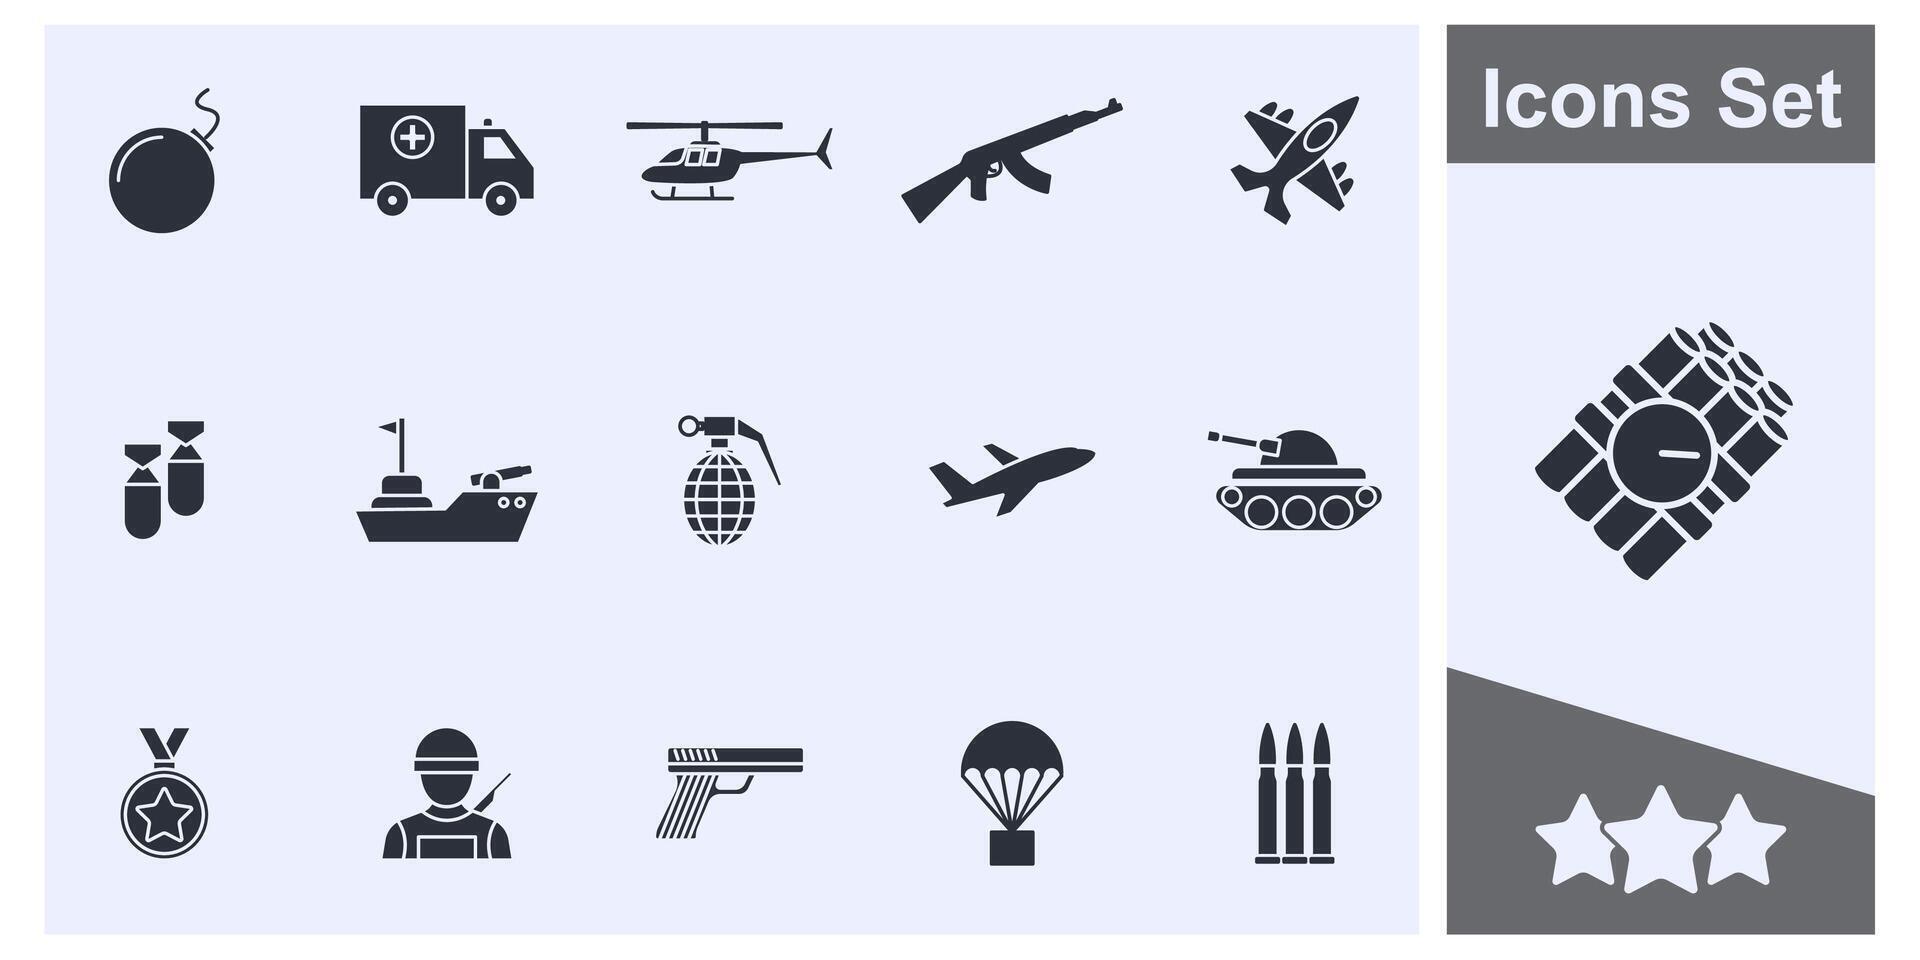 war, military, army icon set symbol collection, logo isolated illustration vector